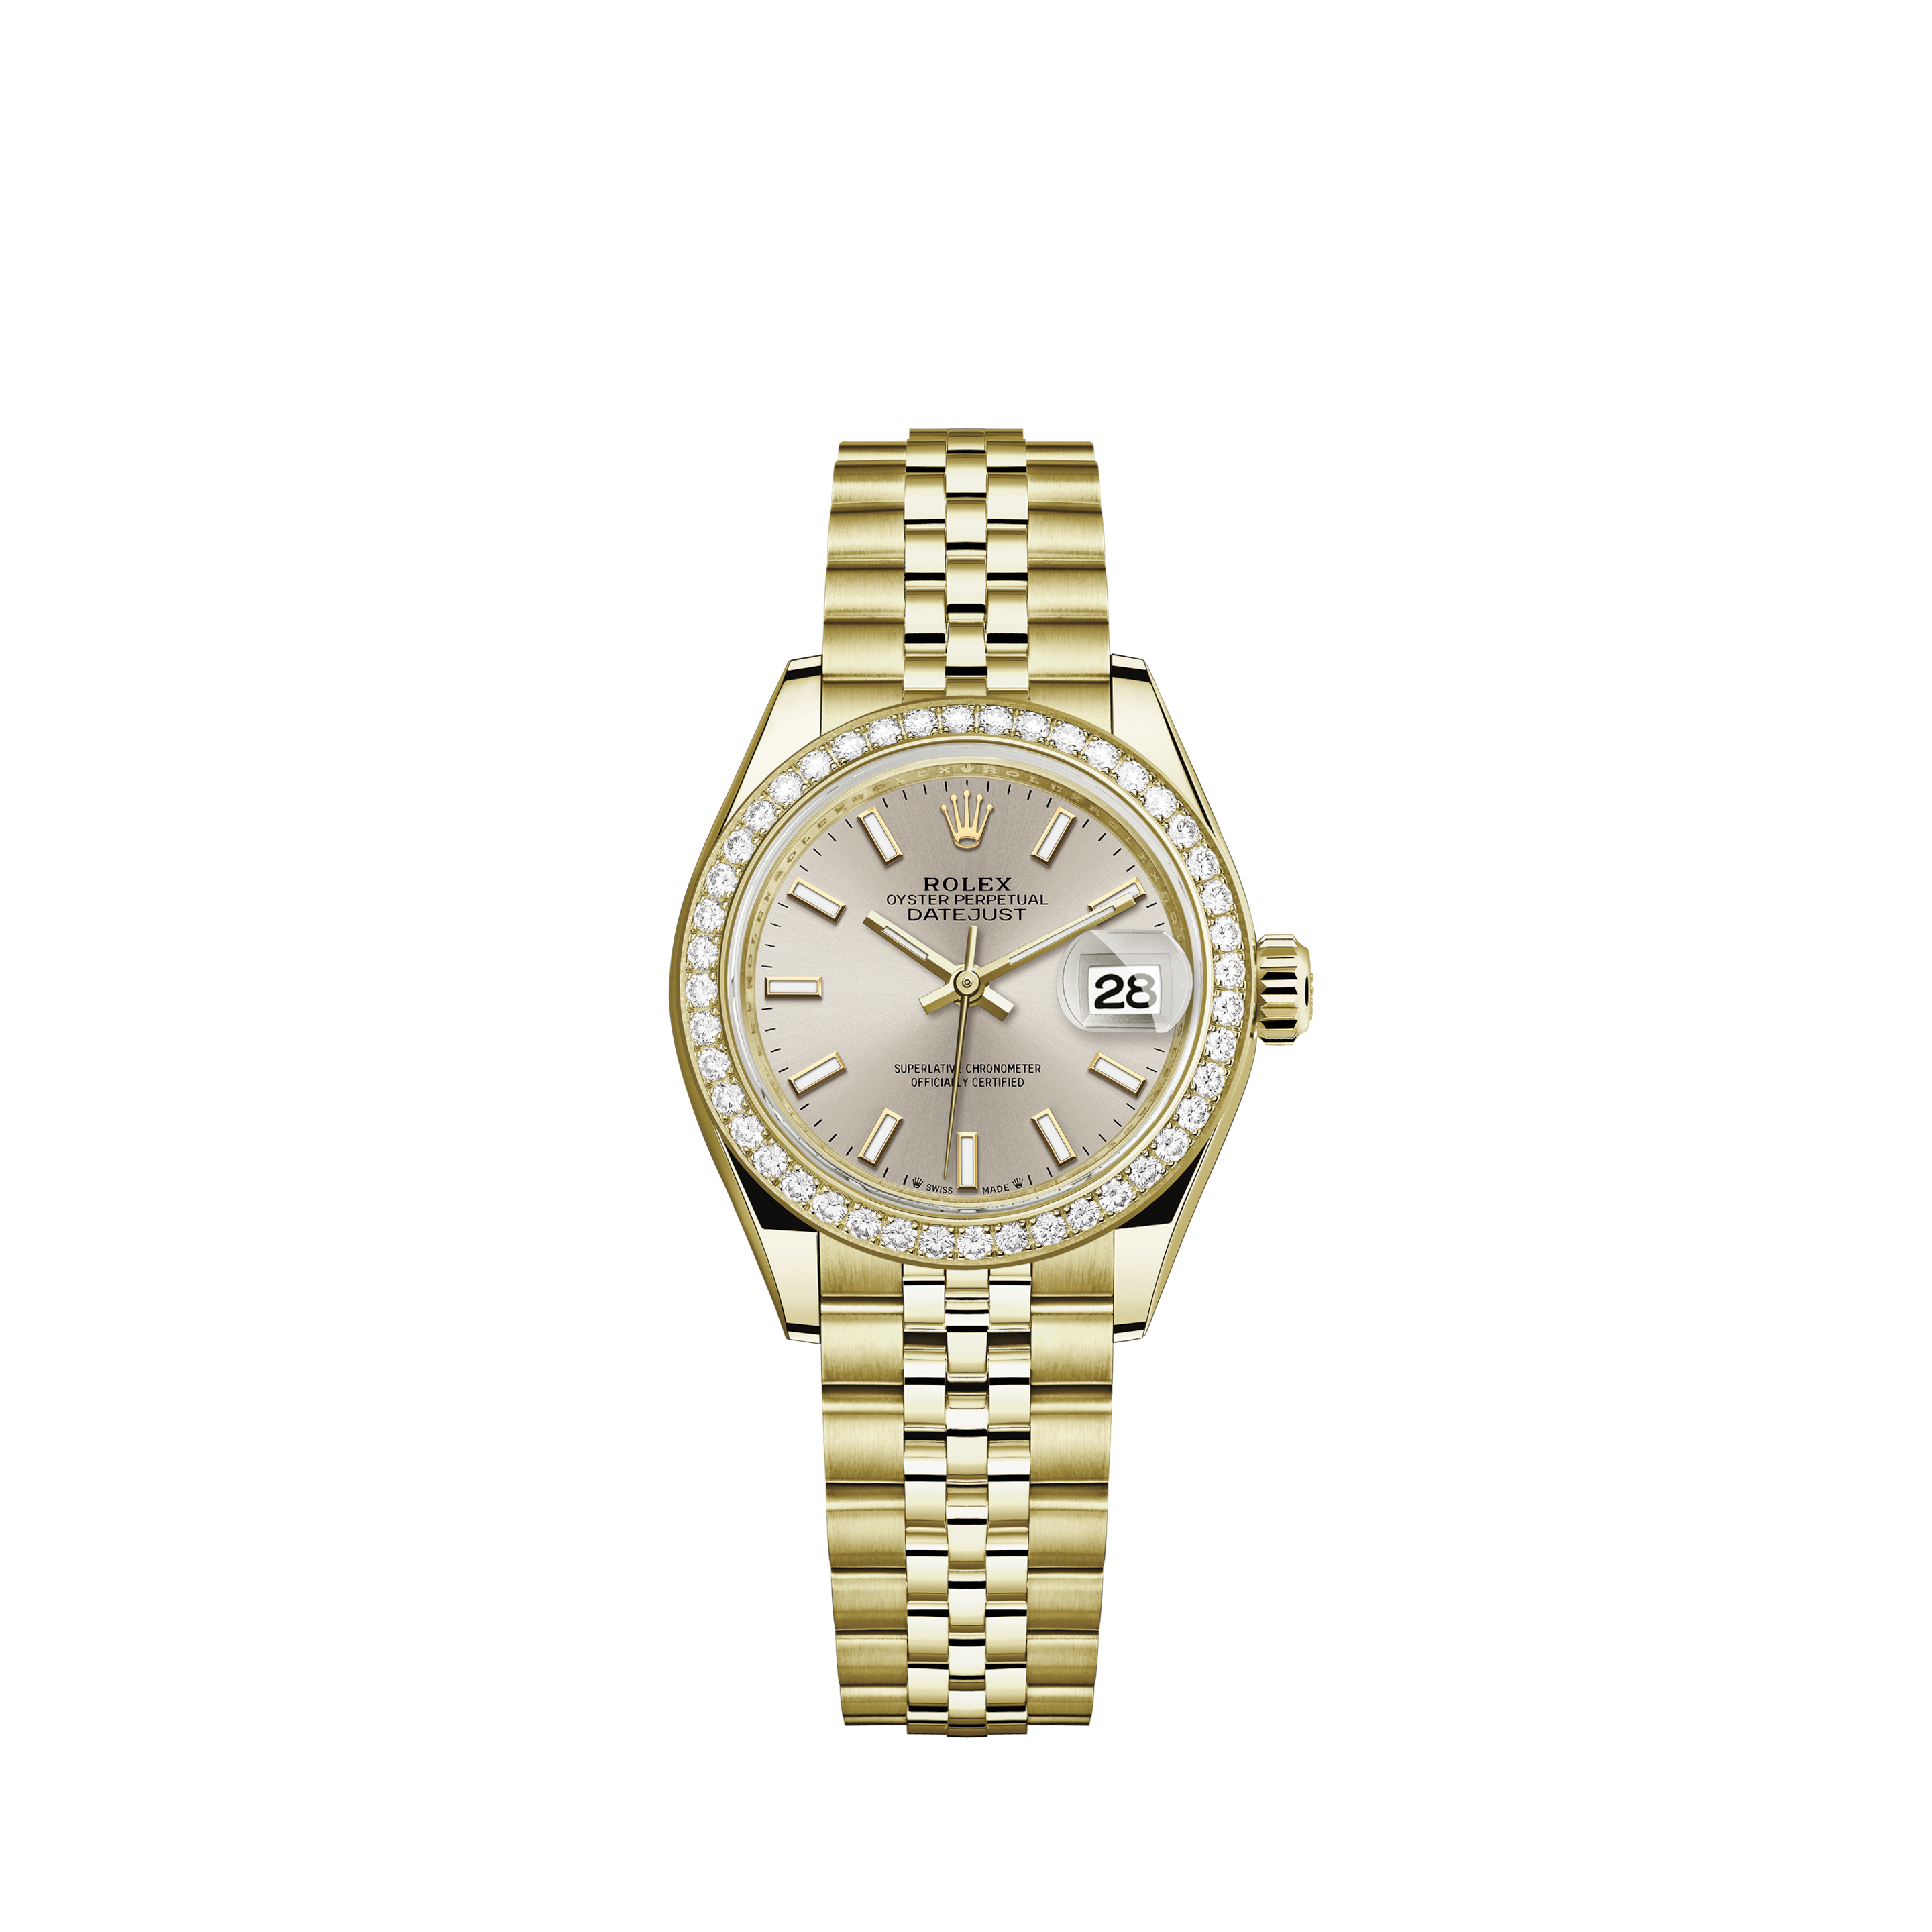 Rolex 36mm Datejust Pink Mother Of Pearl Dial with a Track Fluted Gold Bezel Diamond Lugs